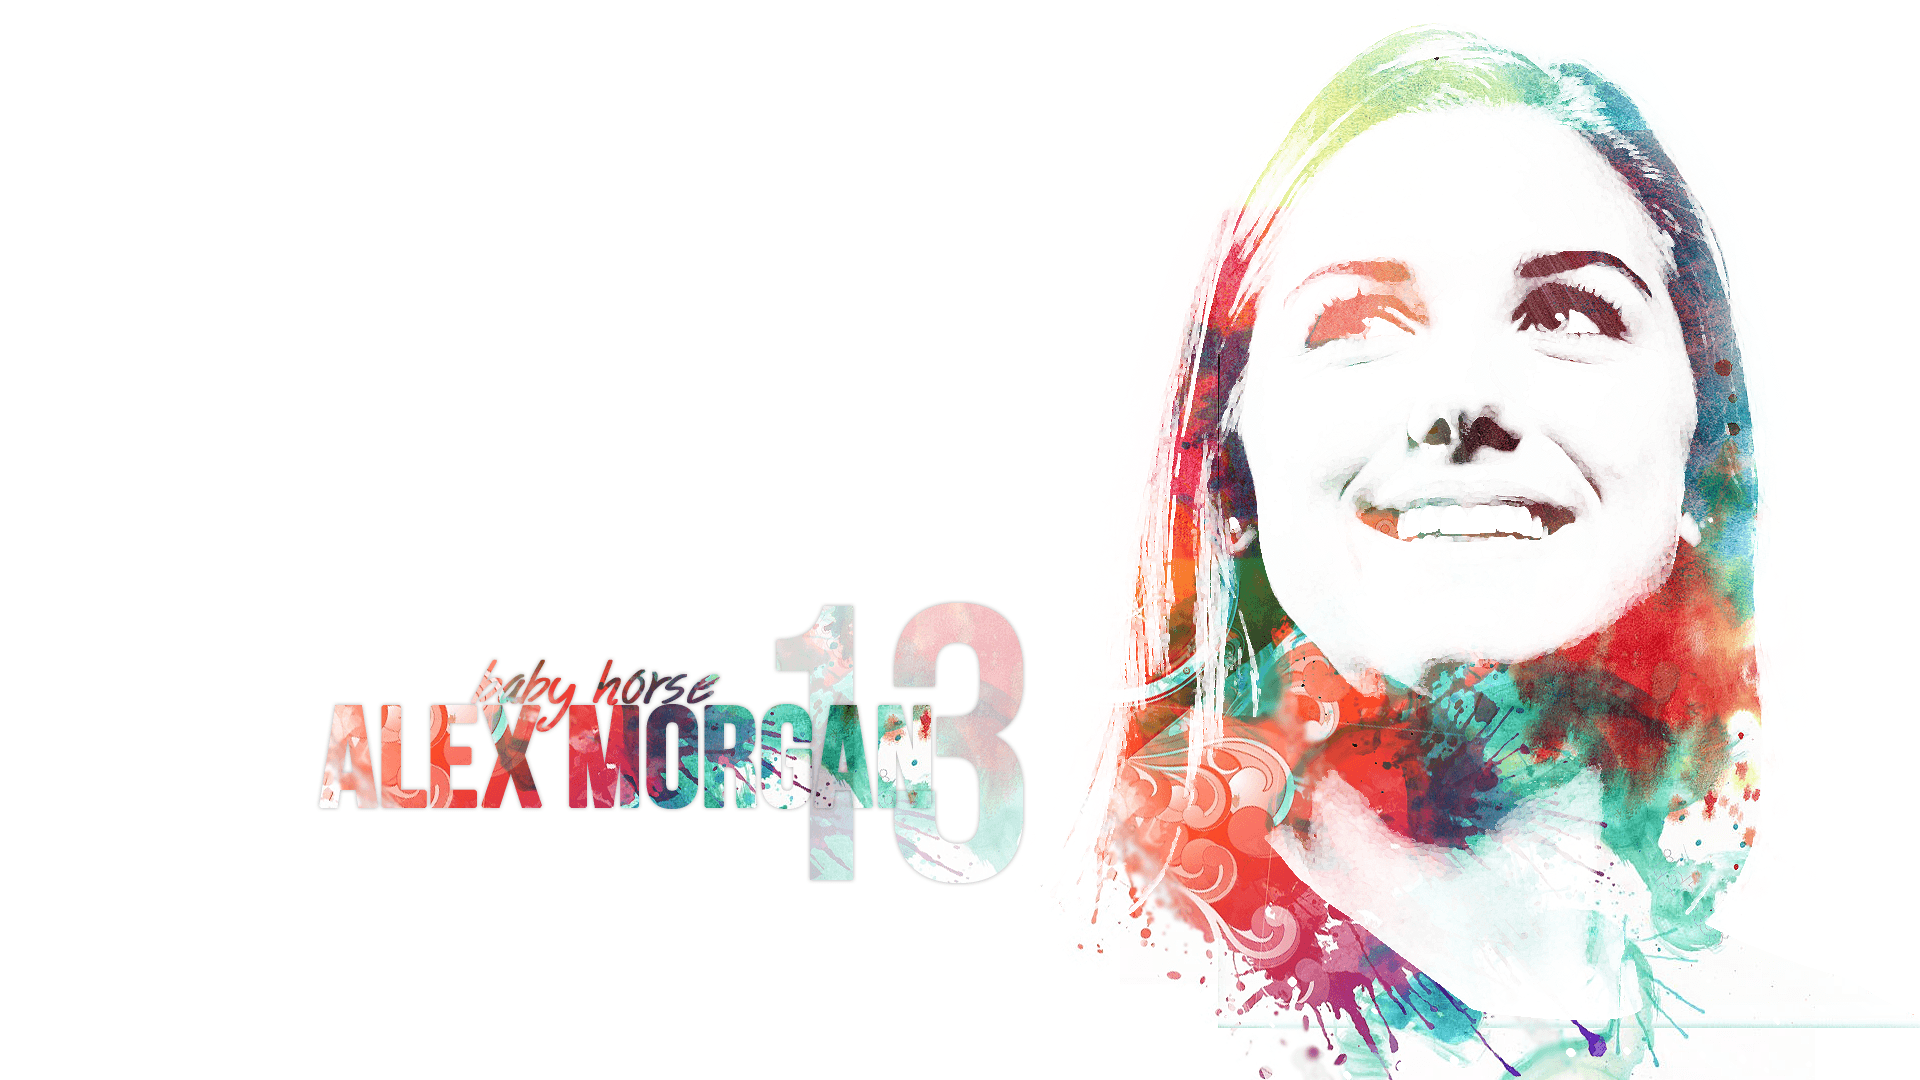 image about Alex Morgan. Olympic qualifying